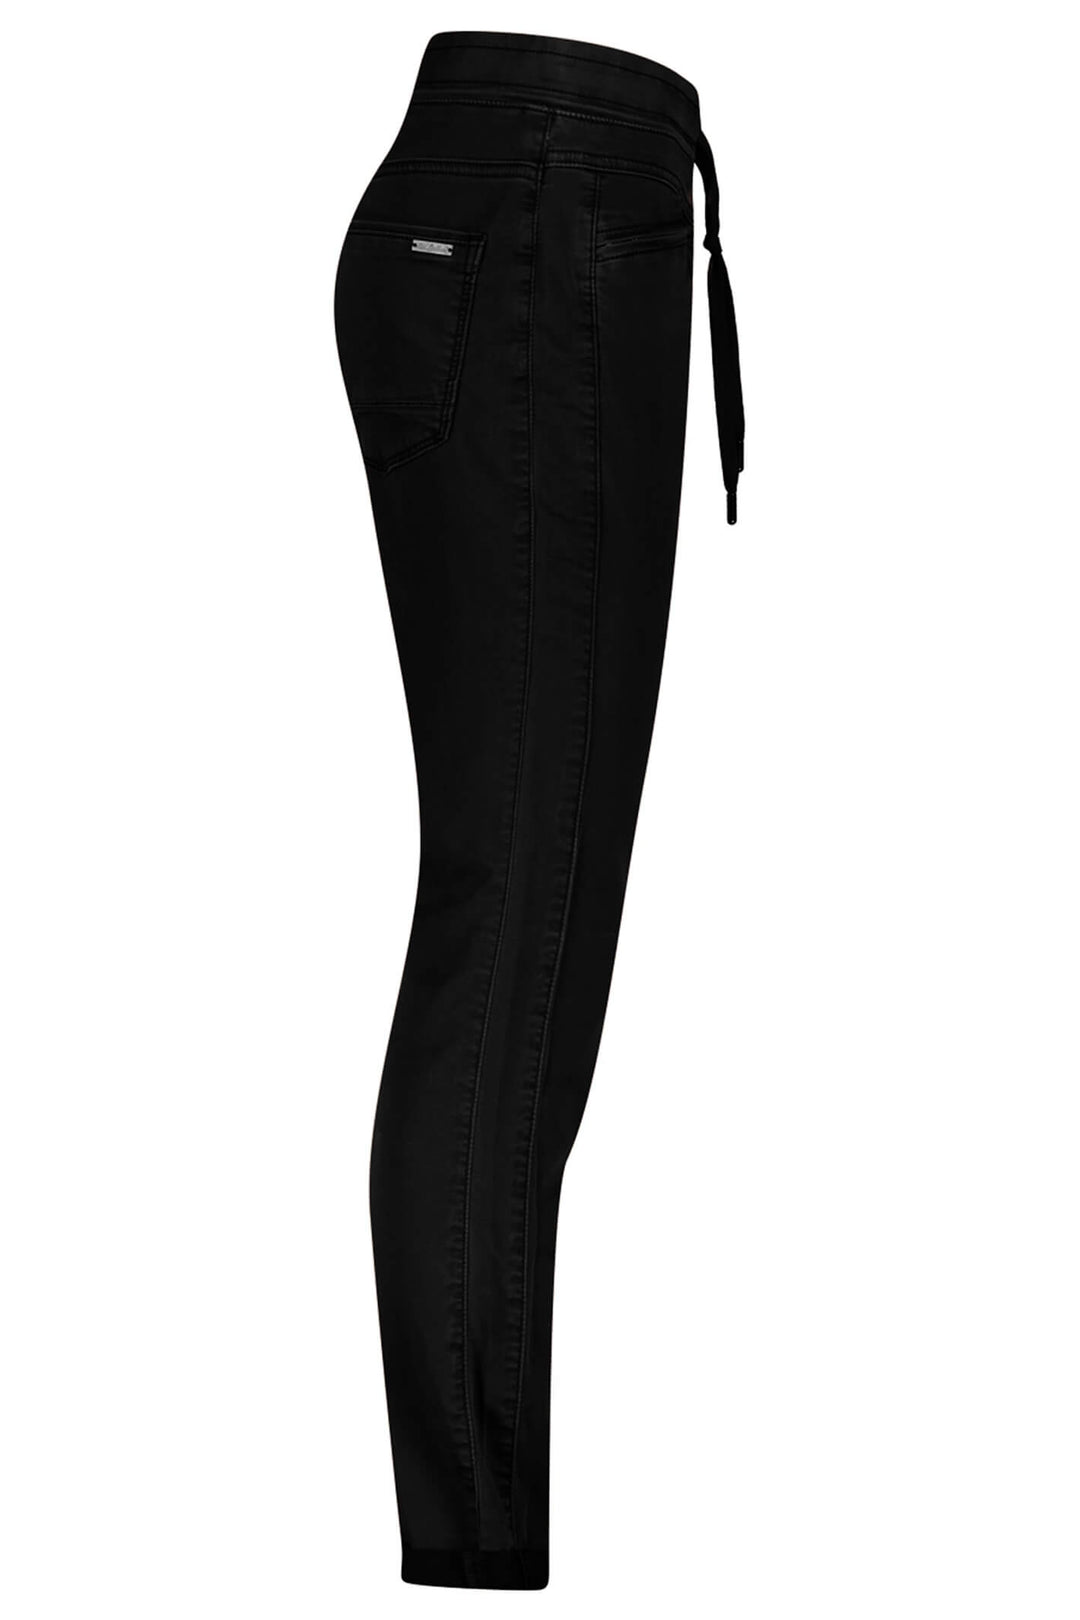 Red Button SRB3071 Tessy Jog Black Pull-On Trousers - Dotique